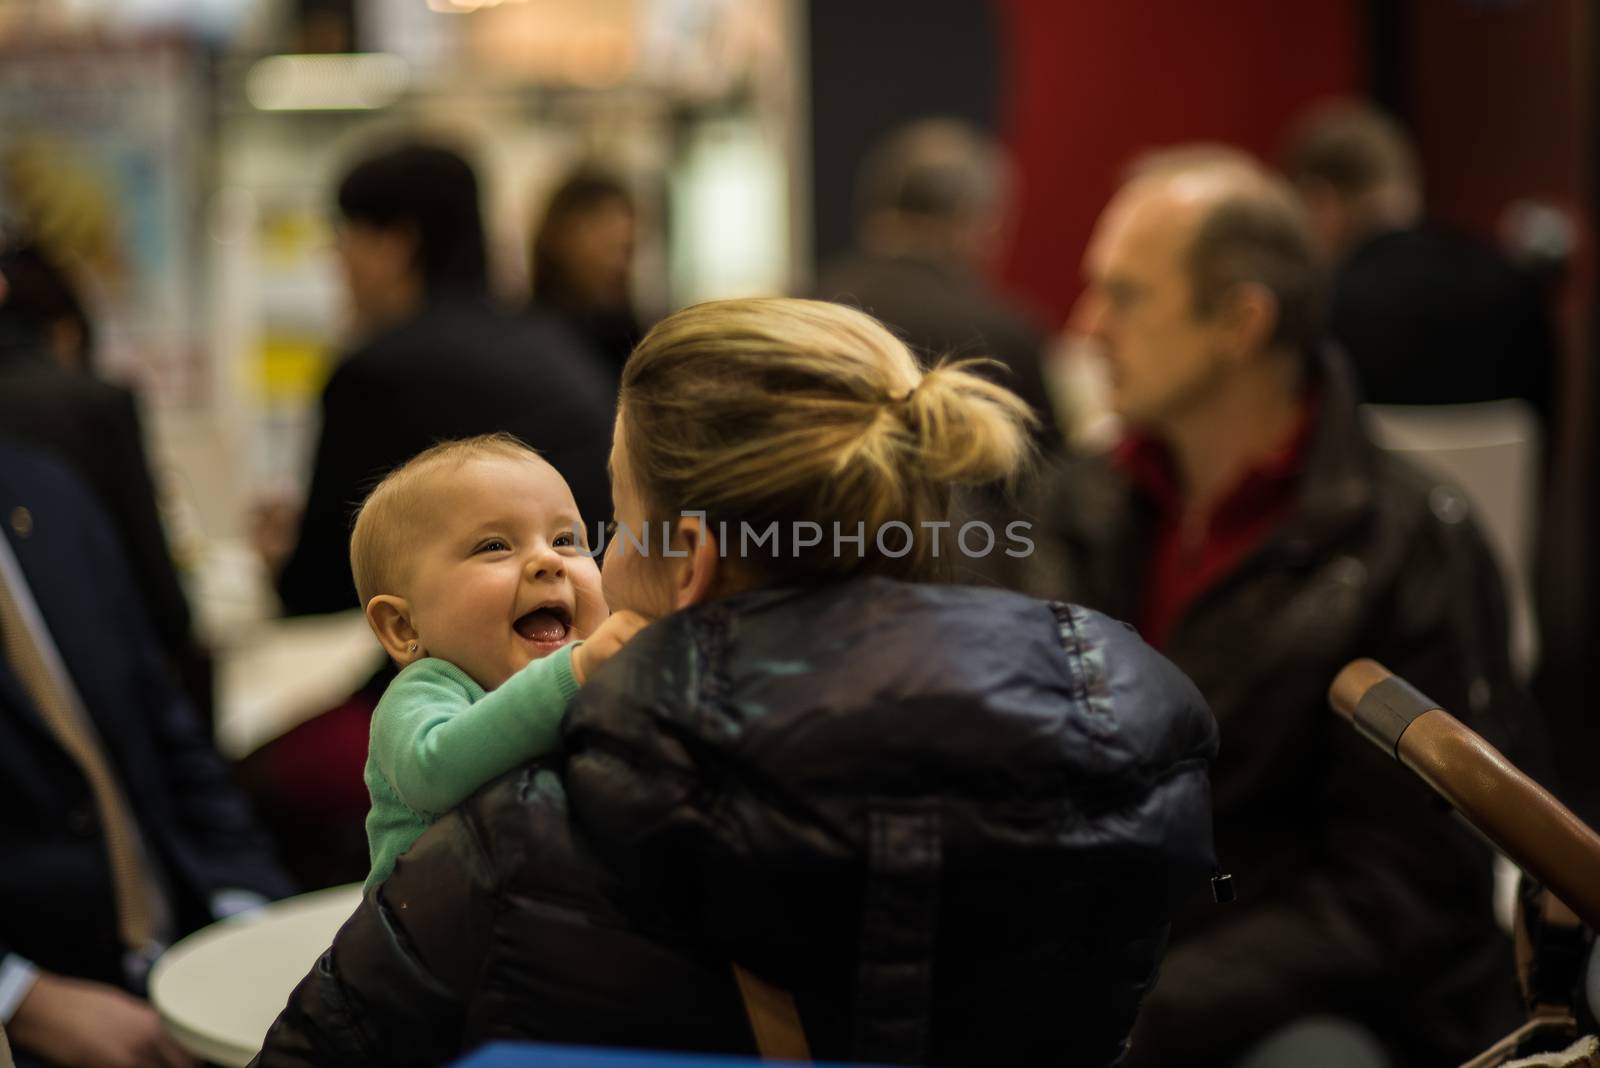 03/04/2018. Brno, Czech Republic. Child having fun with her mother while attending an event at the convention trade center in Brno. BVV Brno Exhibition center. Czech Republic by gonzalobell